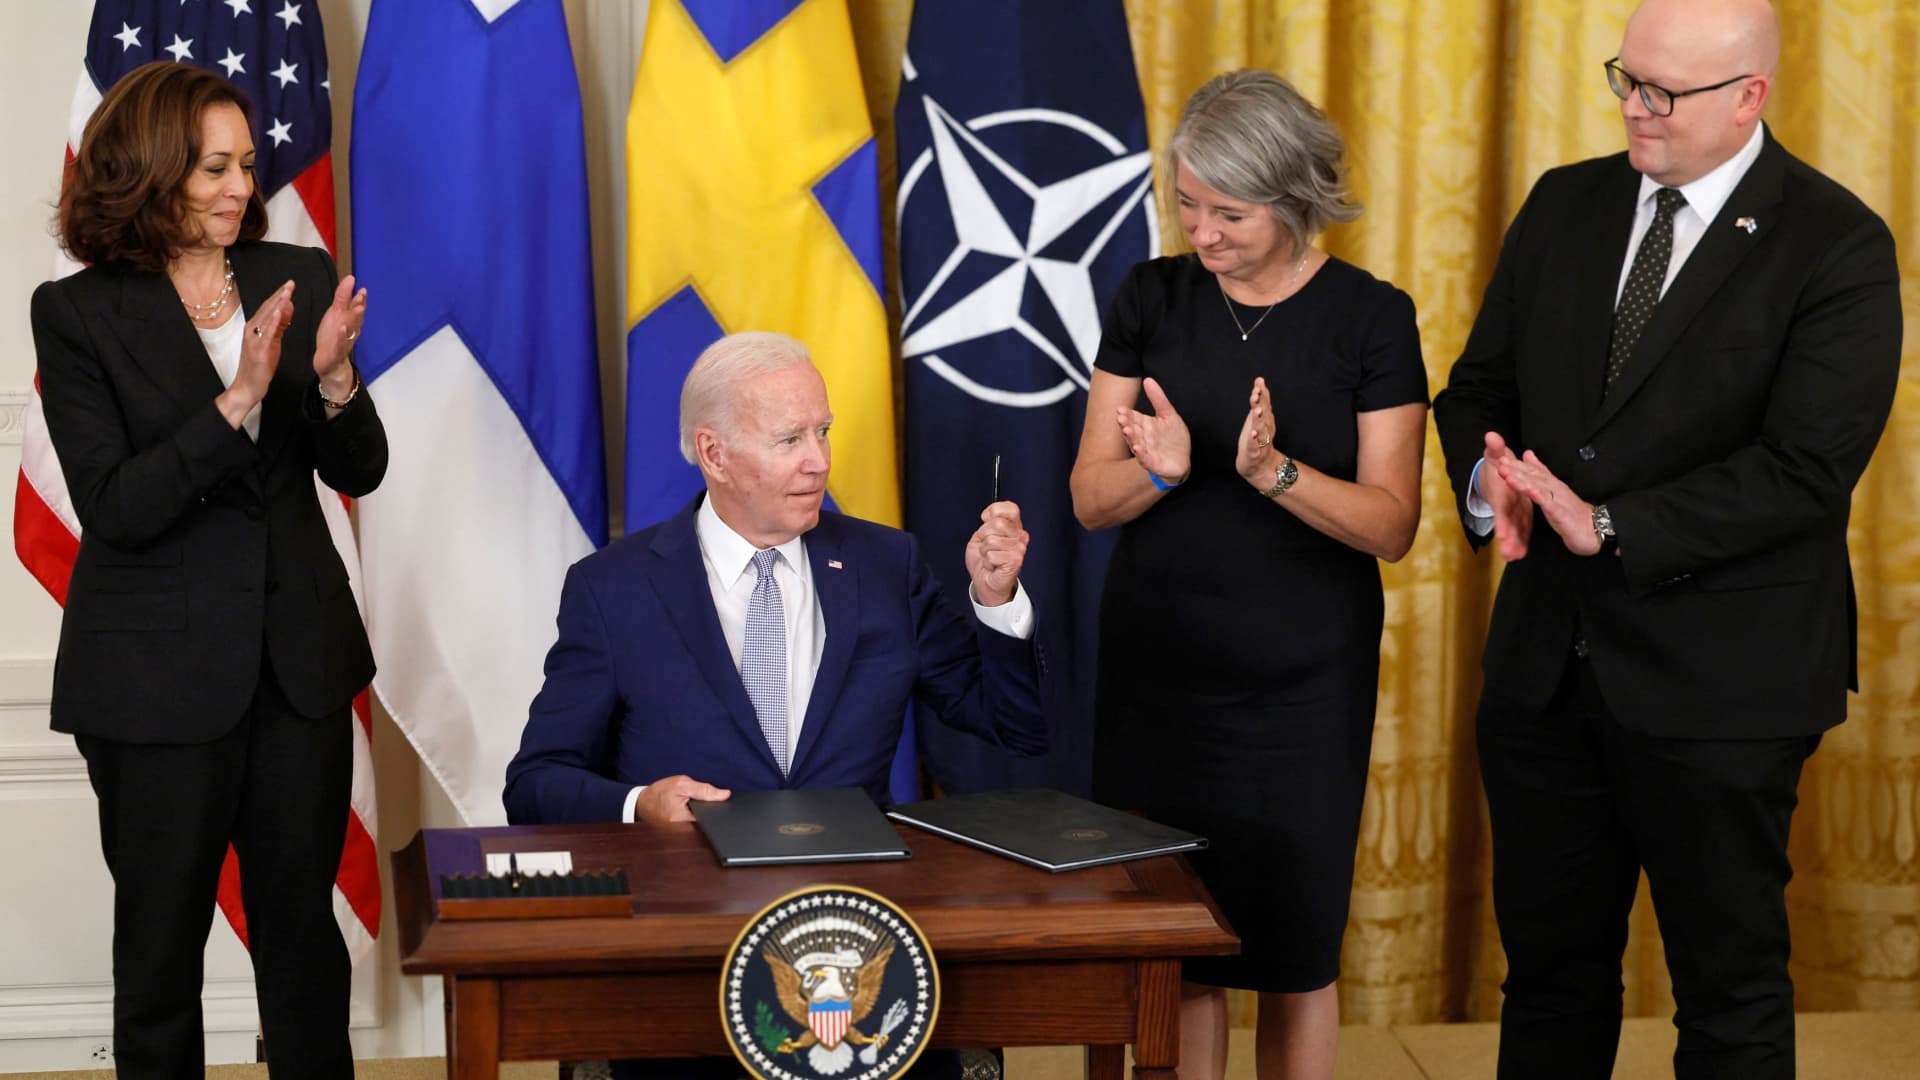 U.S. President Joe Biden, alongside Vice President Kamala Harris, Swedish ambassador to the U.S. Karin Olofsdotter and Finnish ambassador to the U.S. Mikko Hautala, signs documents endorsing Finland's and Sweden's accession to NATO, in the East Room of the White House, in Washington, August 9, 2022.